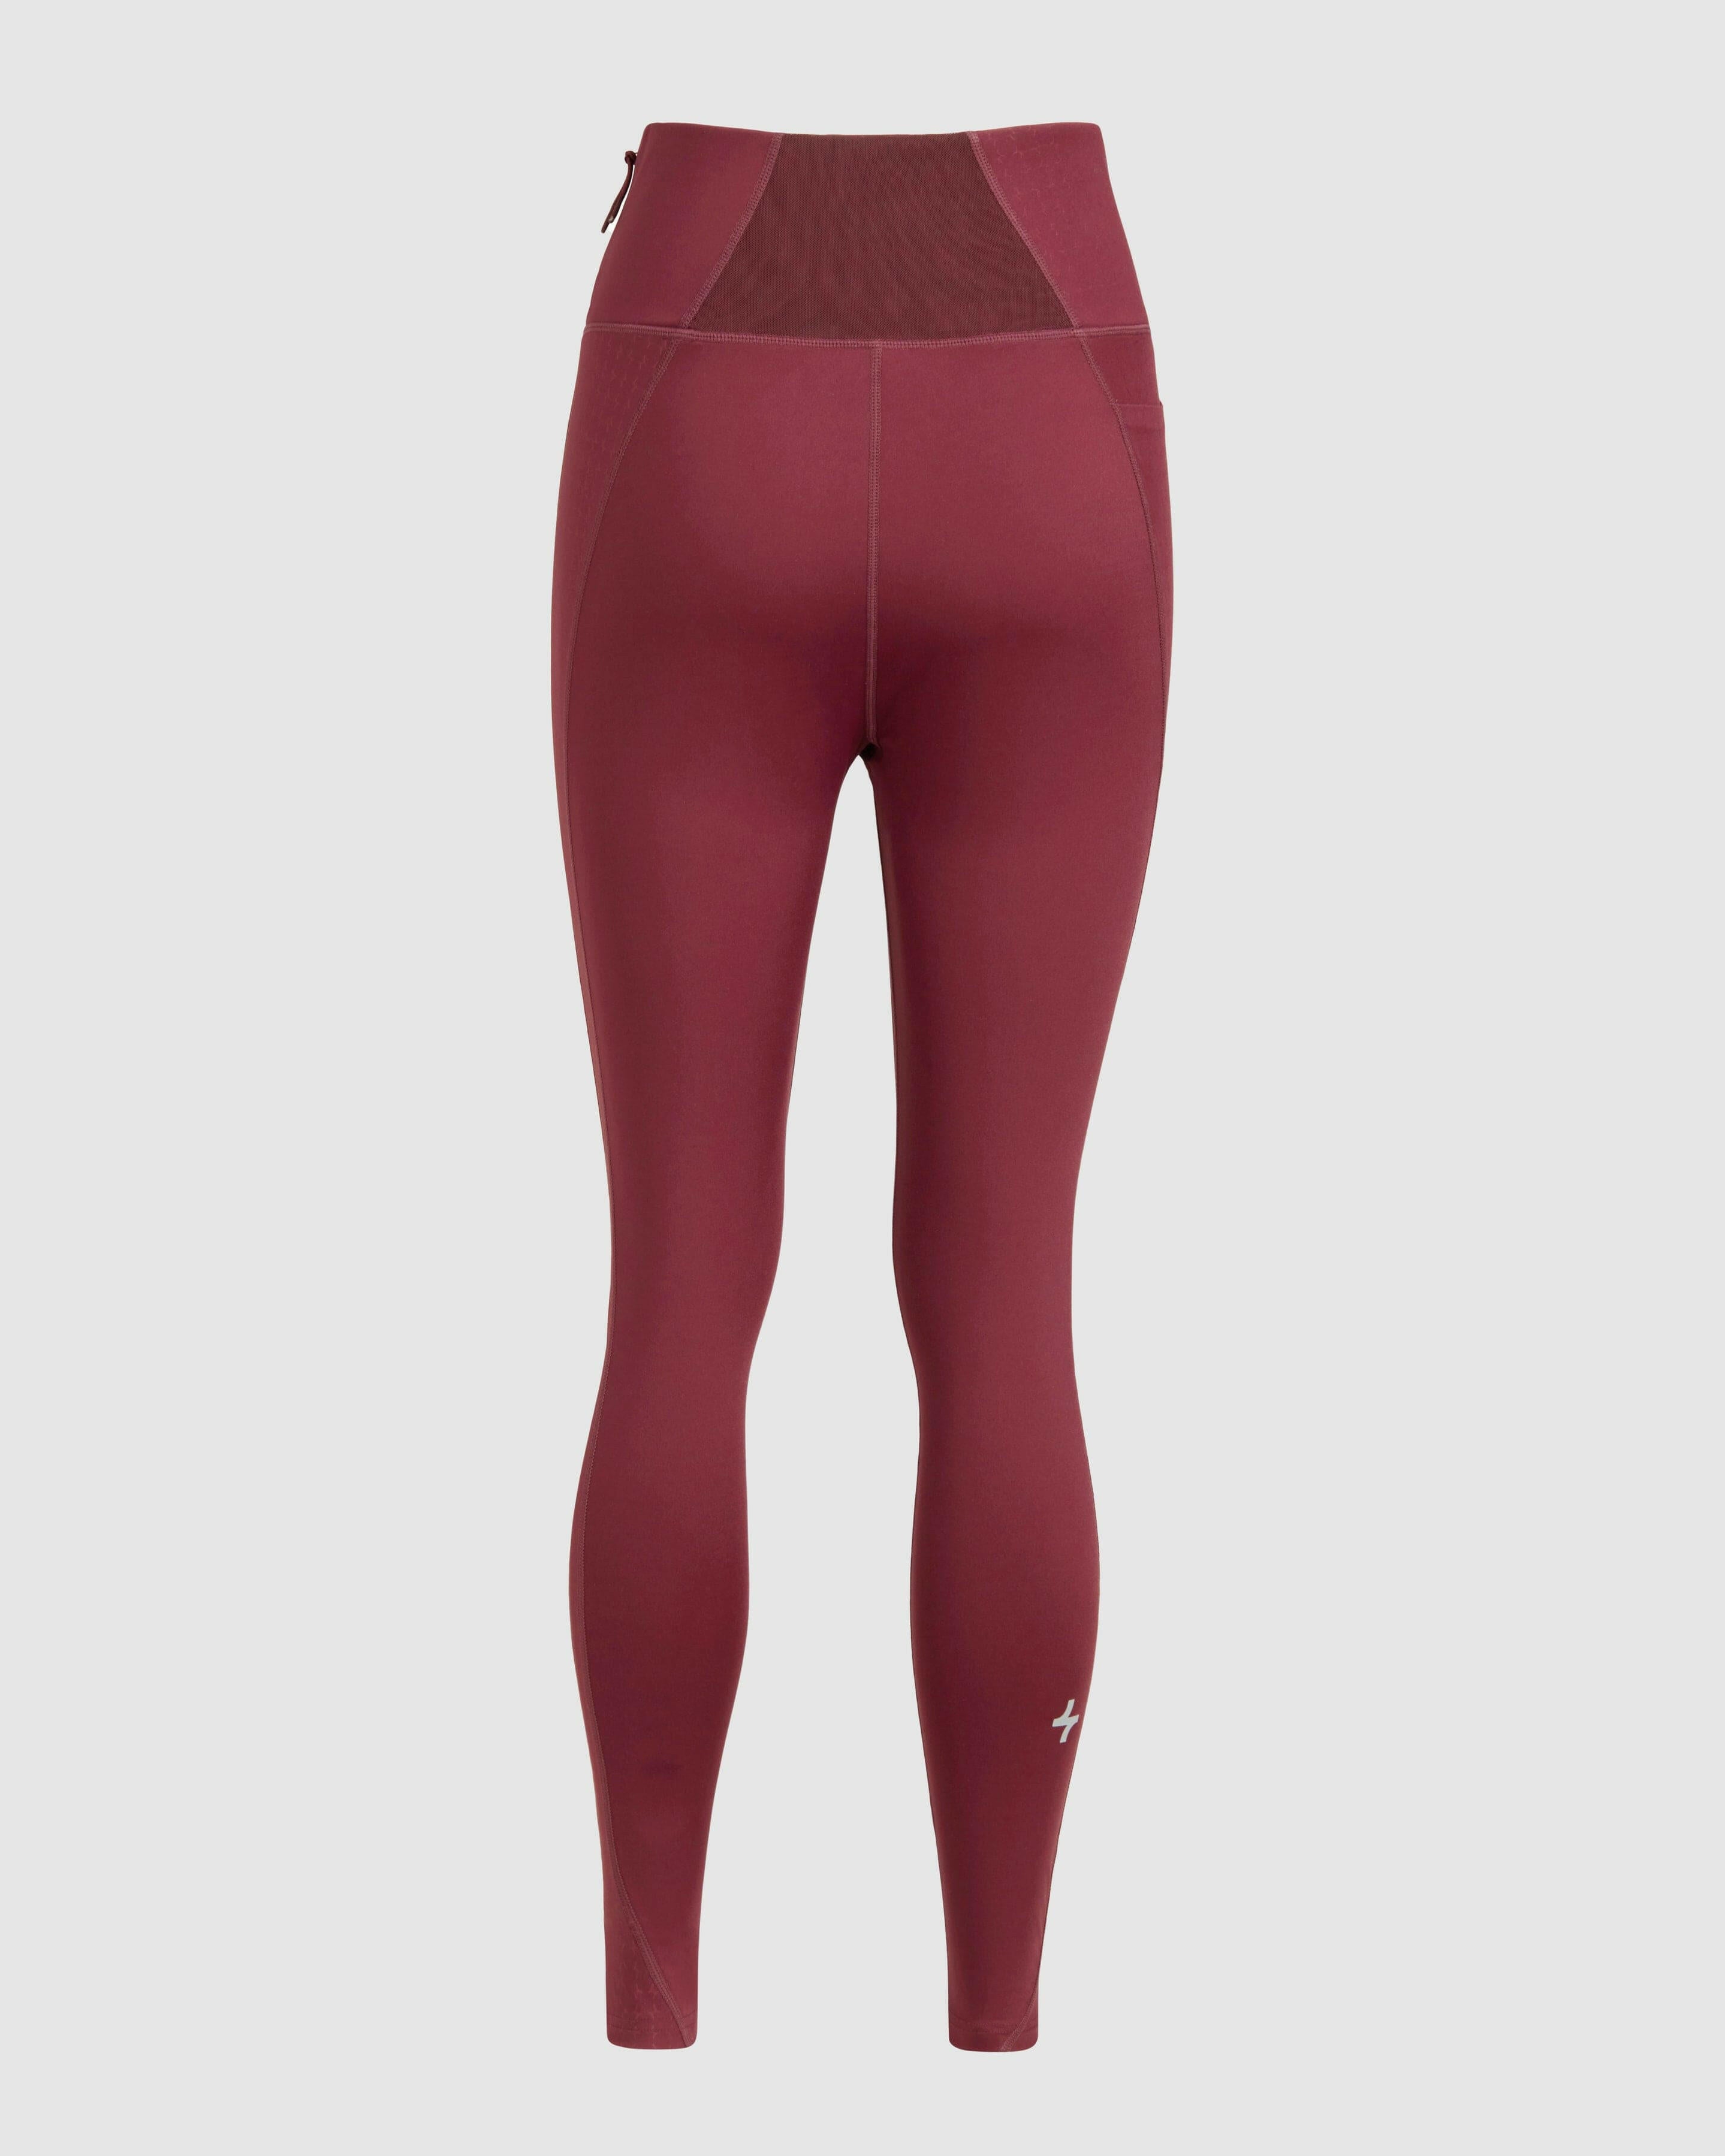 The back side of Stylish Maroon Modest LADINA LEGGINGS by Qynda with a high waistband and better fitting, zipper detail on white background.